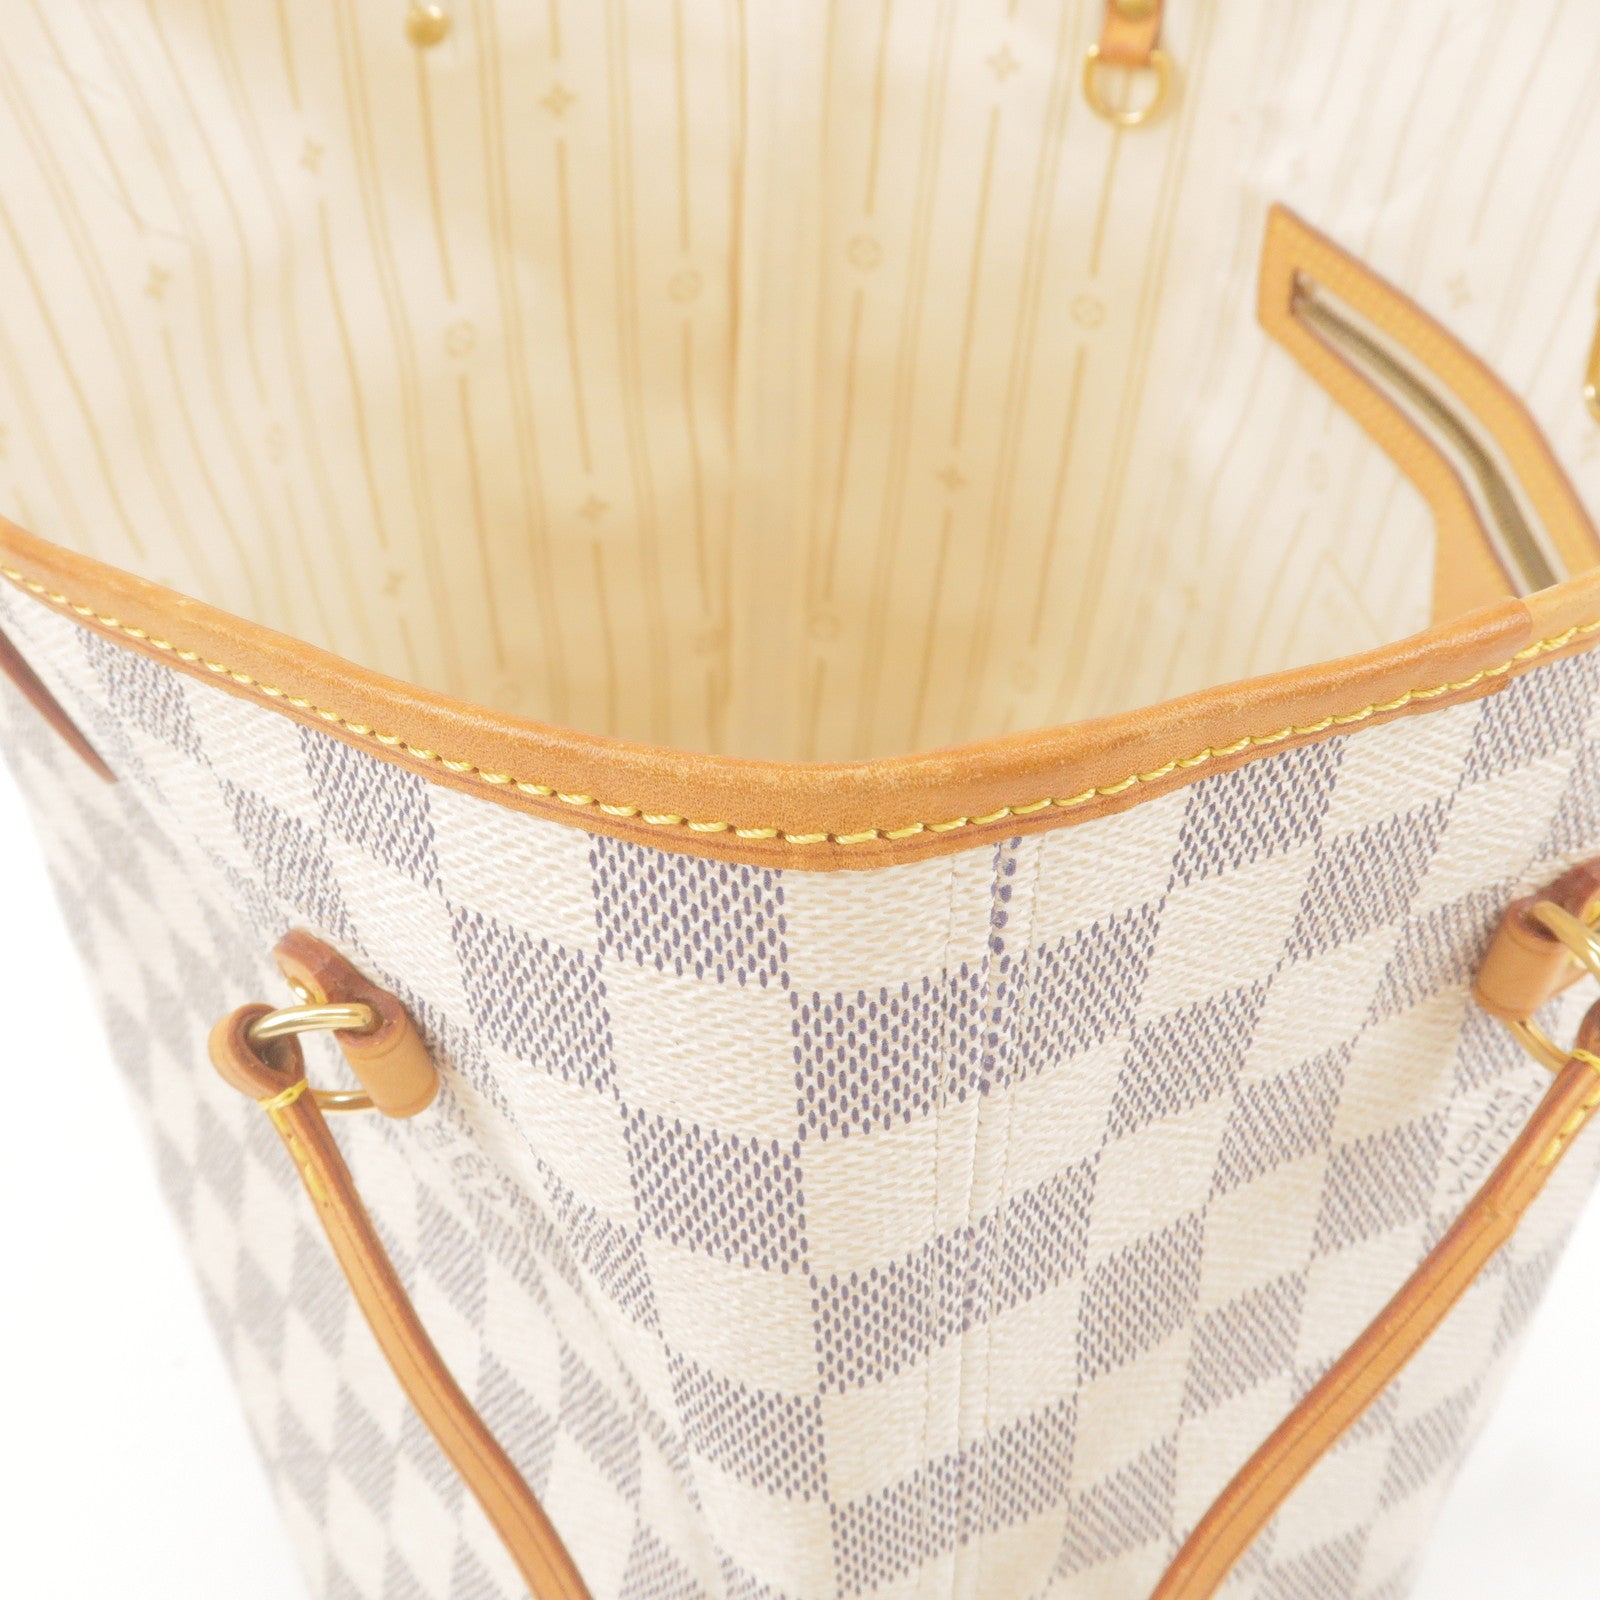 Louis-Vuitton-Damier-Azur-Neverfull-MM-Tote-Bag-N41605 – dct-ep_vintage  luxury Store